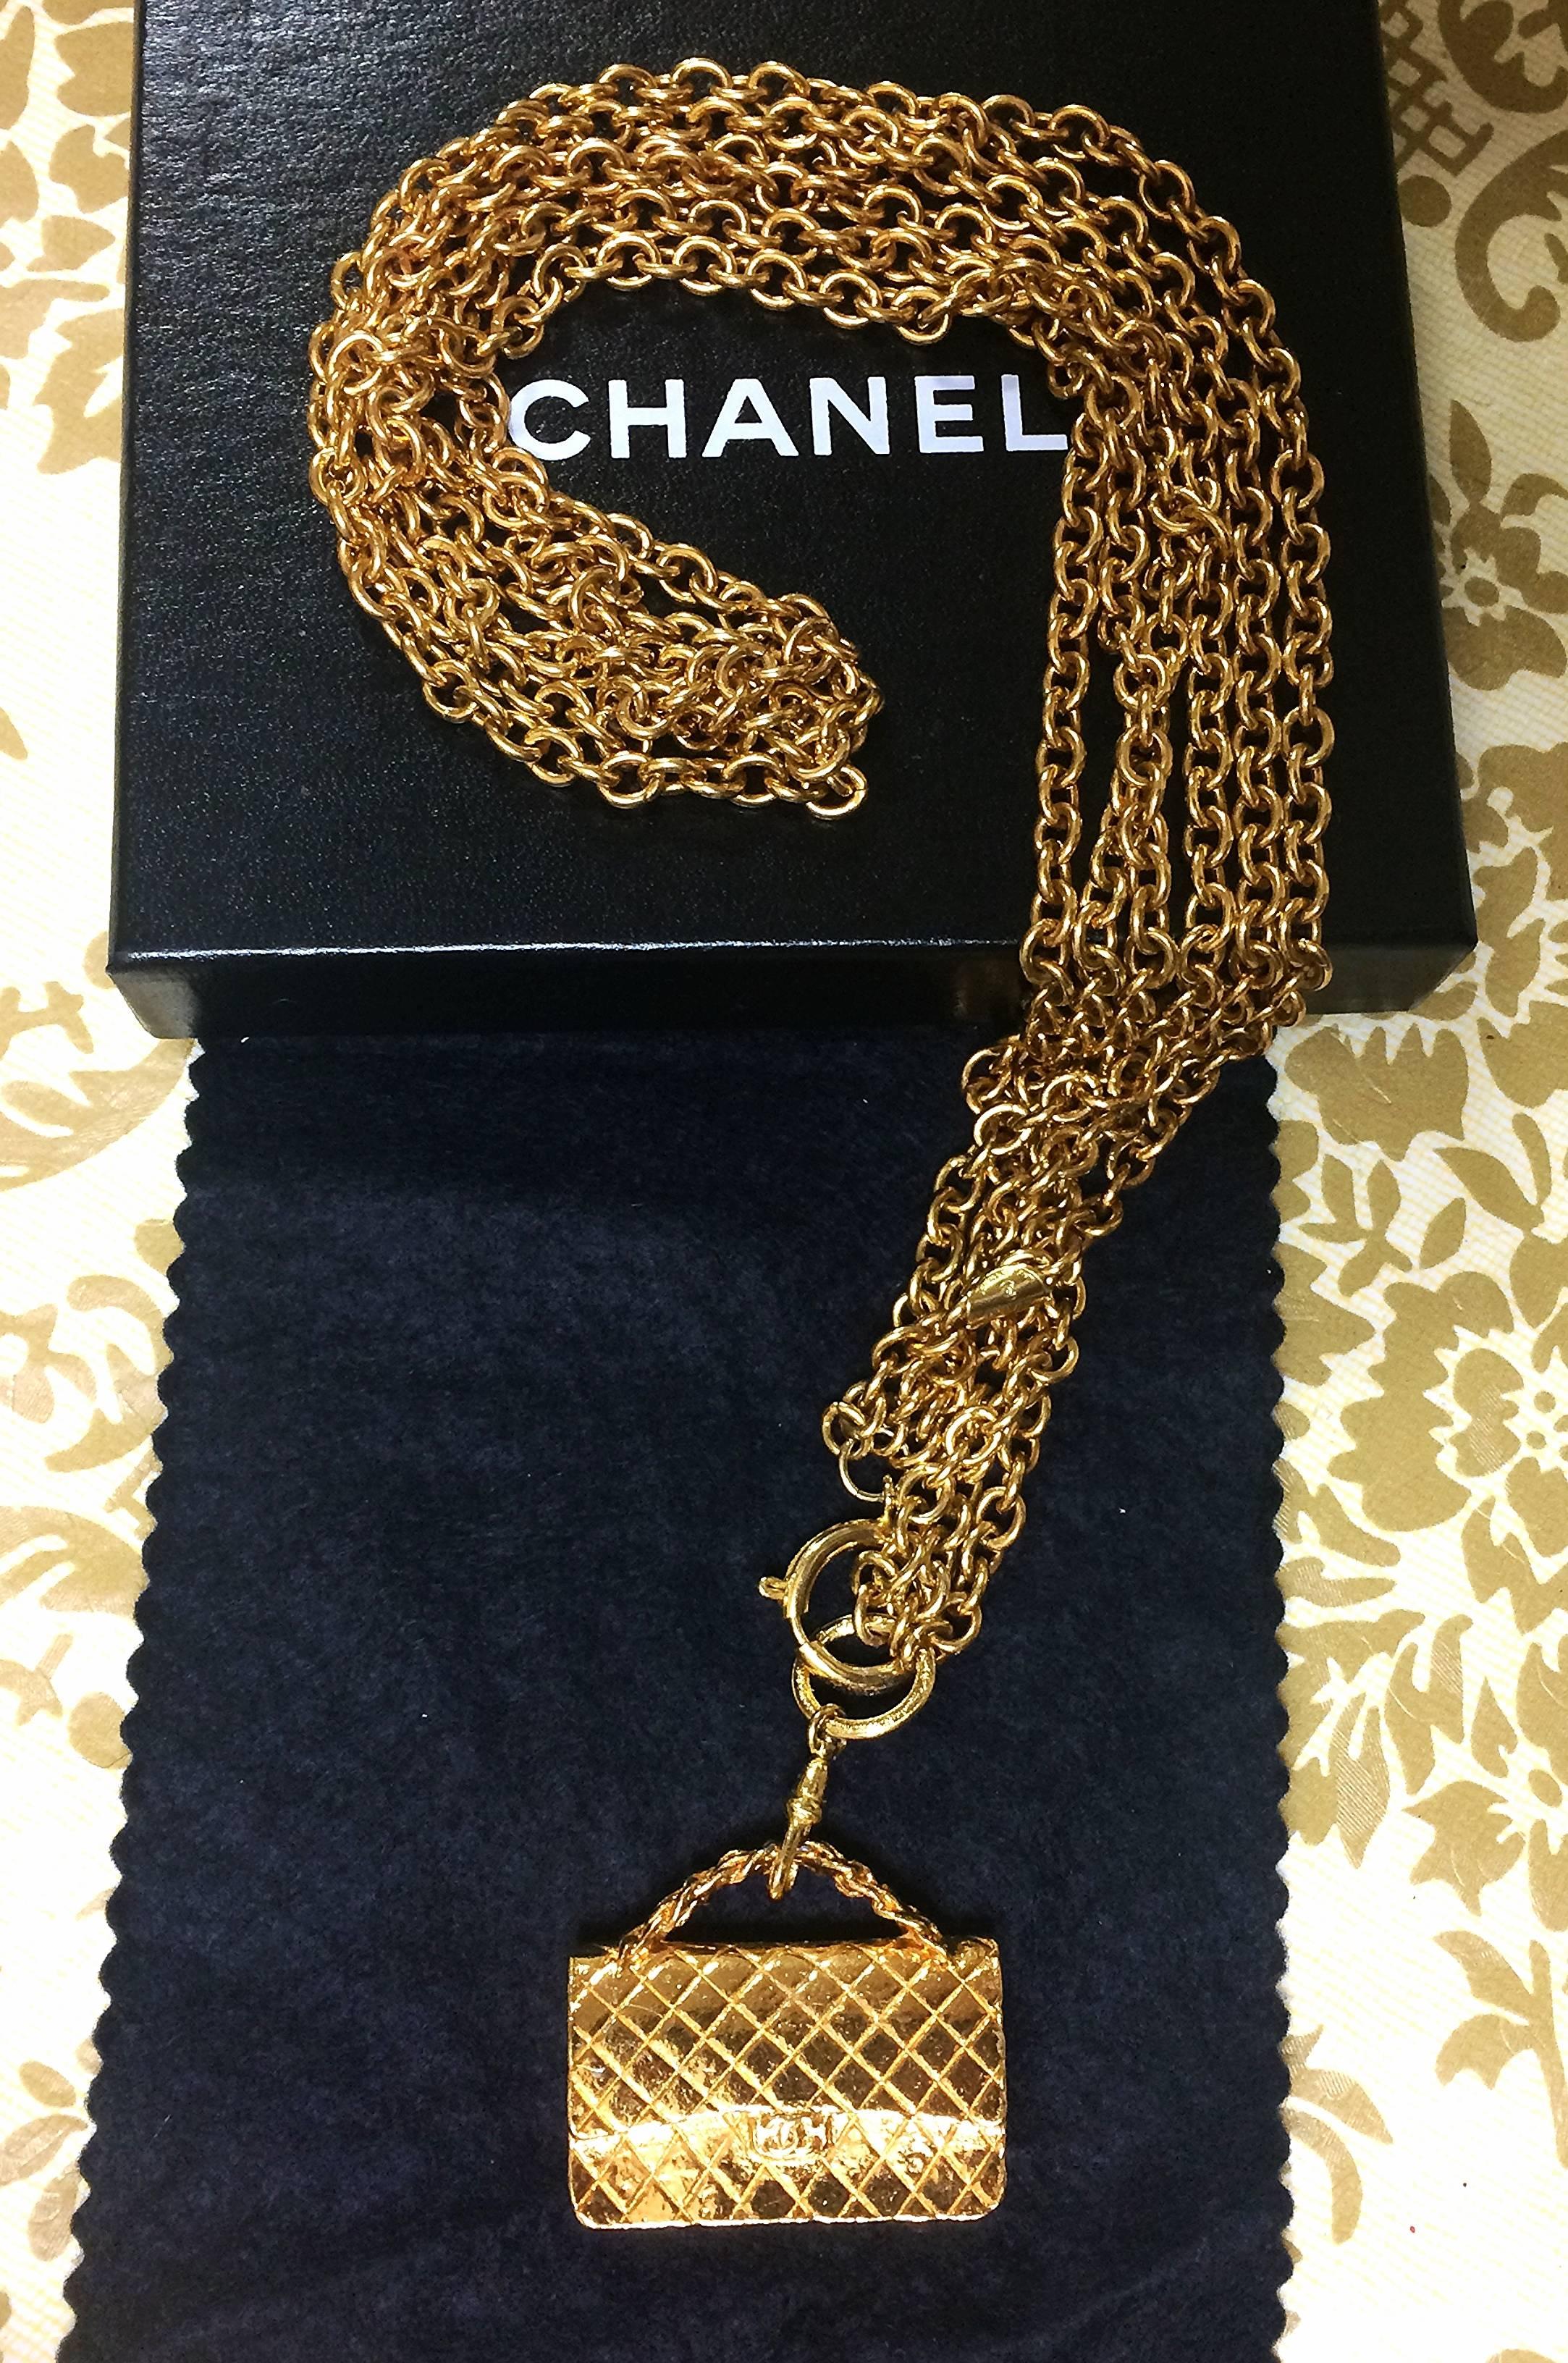 Vintage CHANEL golden double chain long necklace with classic 2.55 bag charm. 6